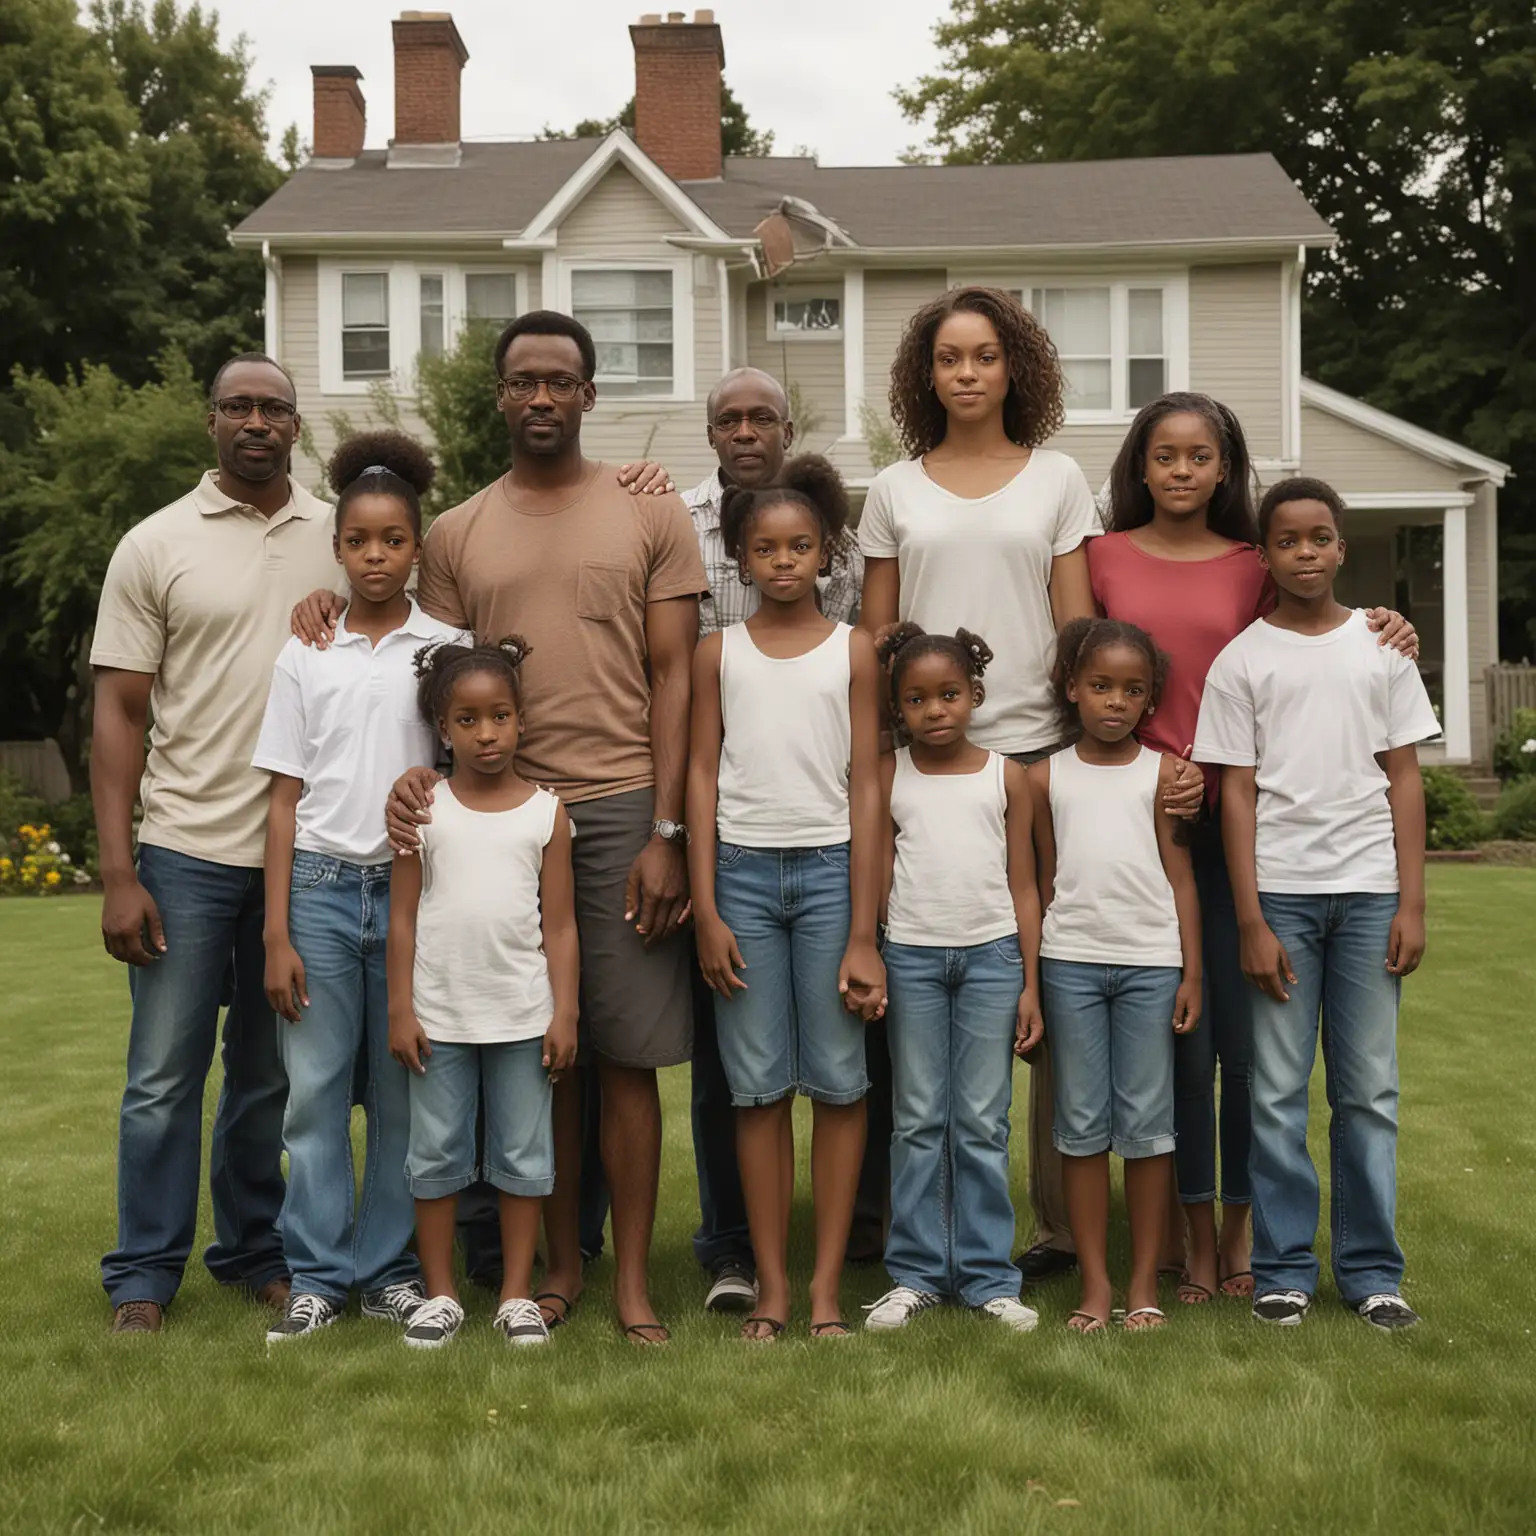 Generate an image of the Samples Family, depicted as a skinny black father and a short fat black woman standing on opposite sides of a house, with their arms crossed. In the center, between the mother and father, stands 11 black girls of different heights and 4 black boys of different heights on the lawn, none more than 5’11’.  Despite the house, the family appears united and resilient.